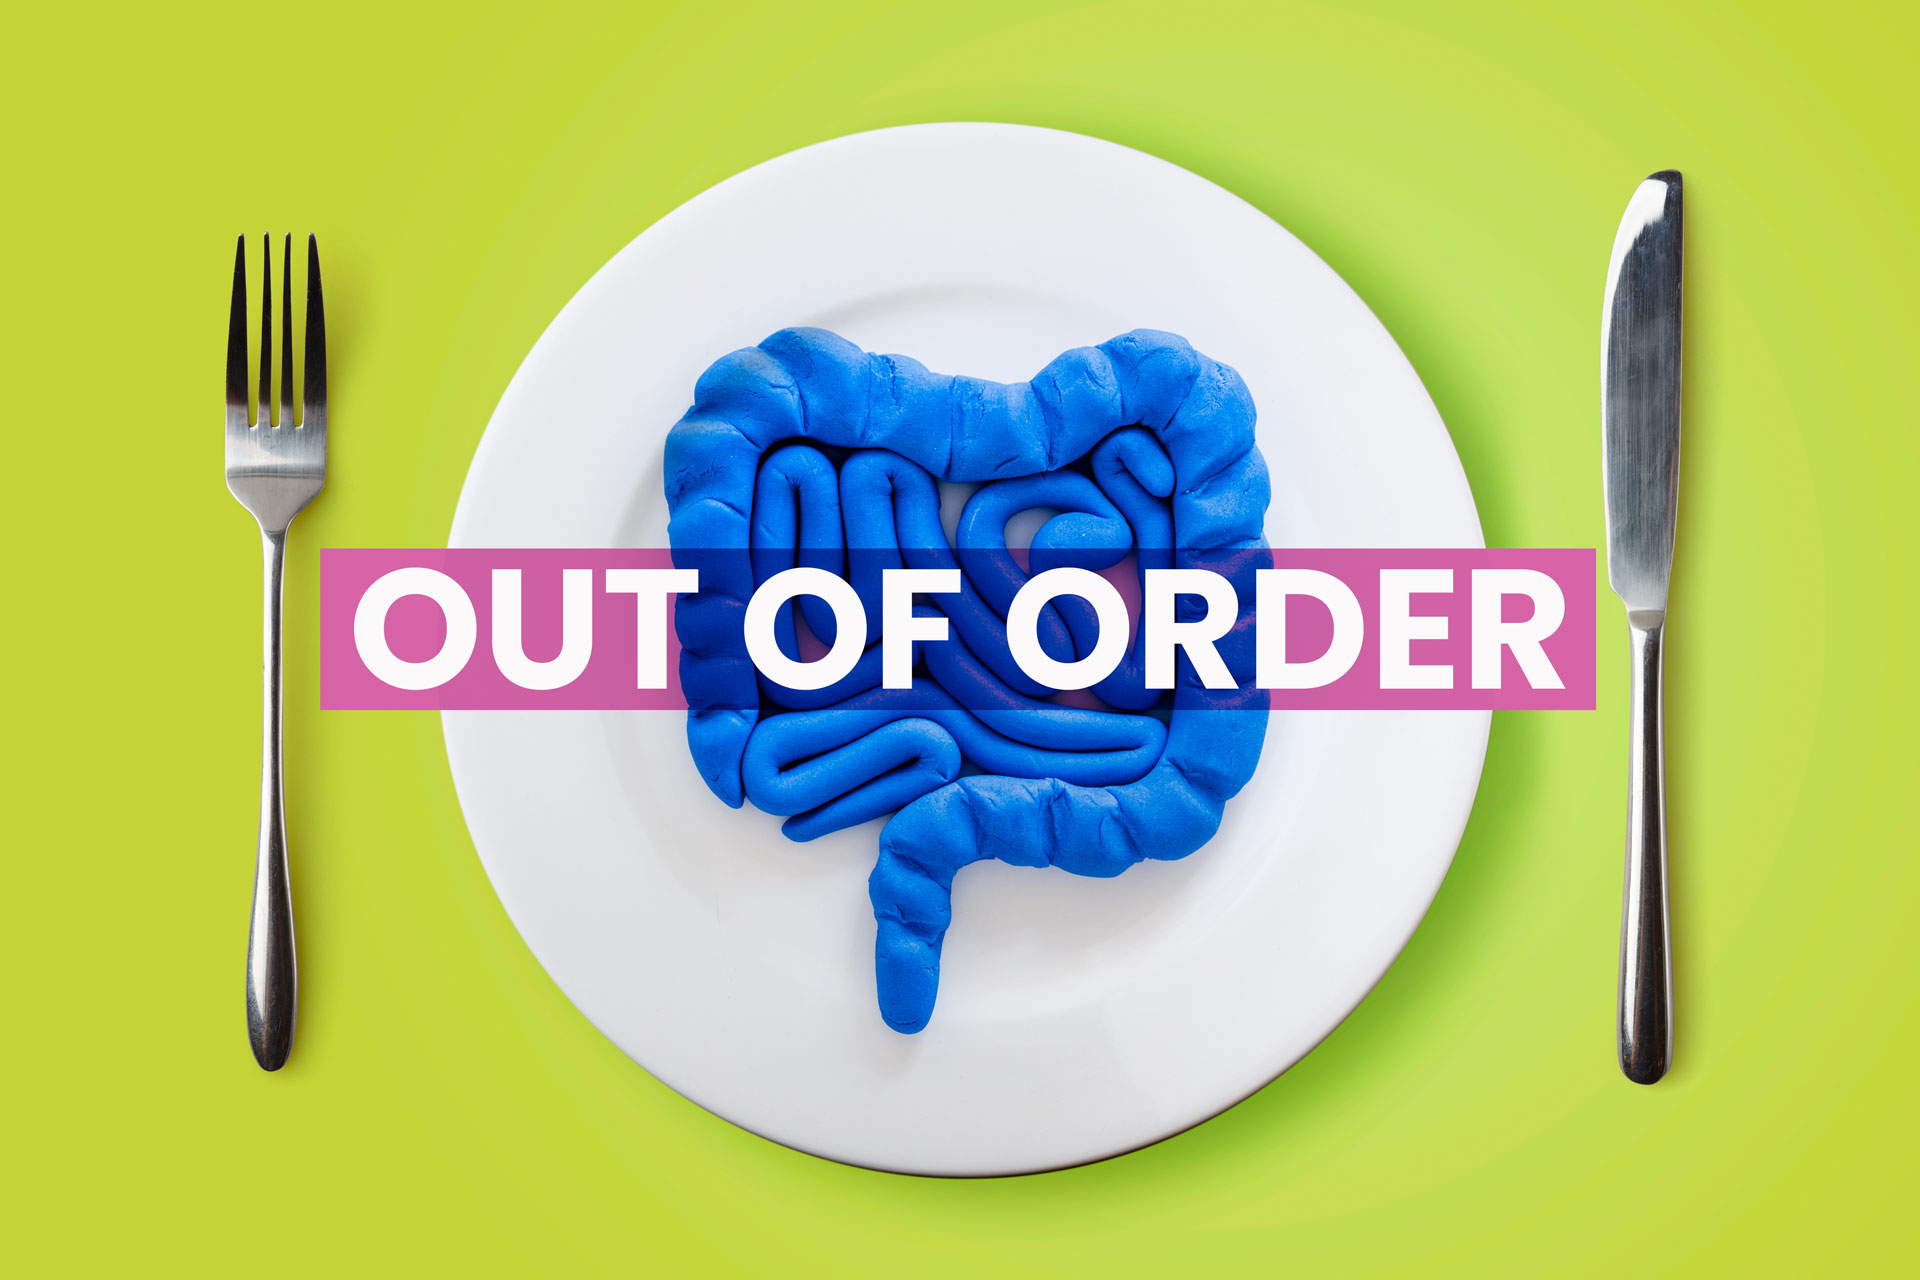 Eating Disorders, Restrictive Dieting and the Affects on Gut Health